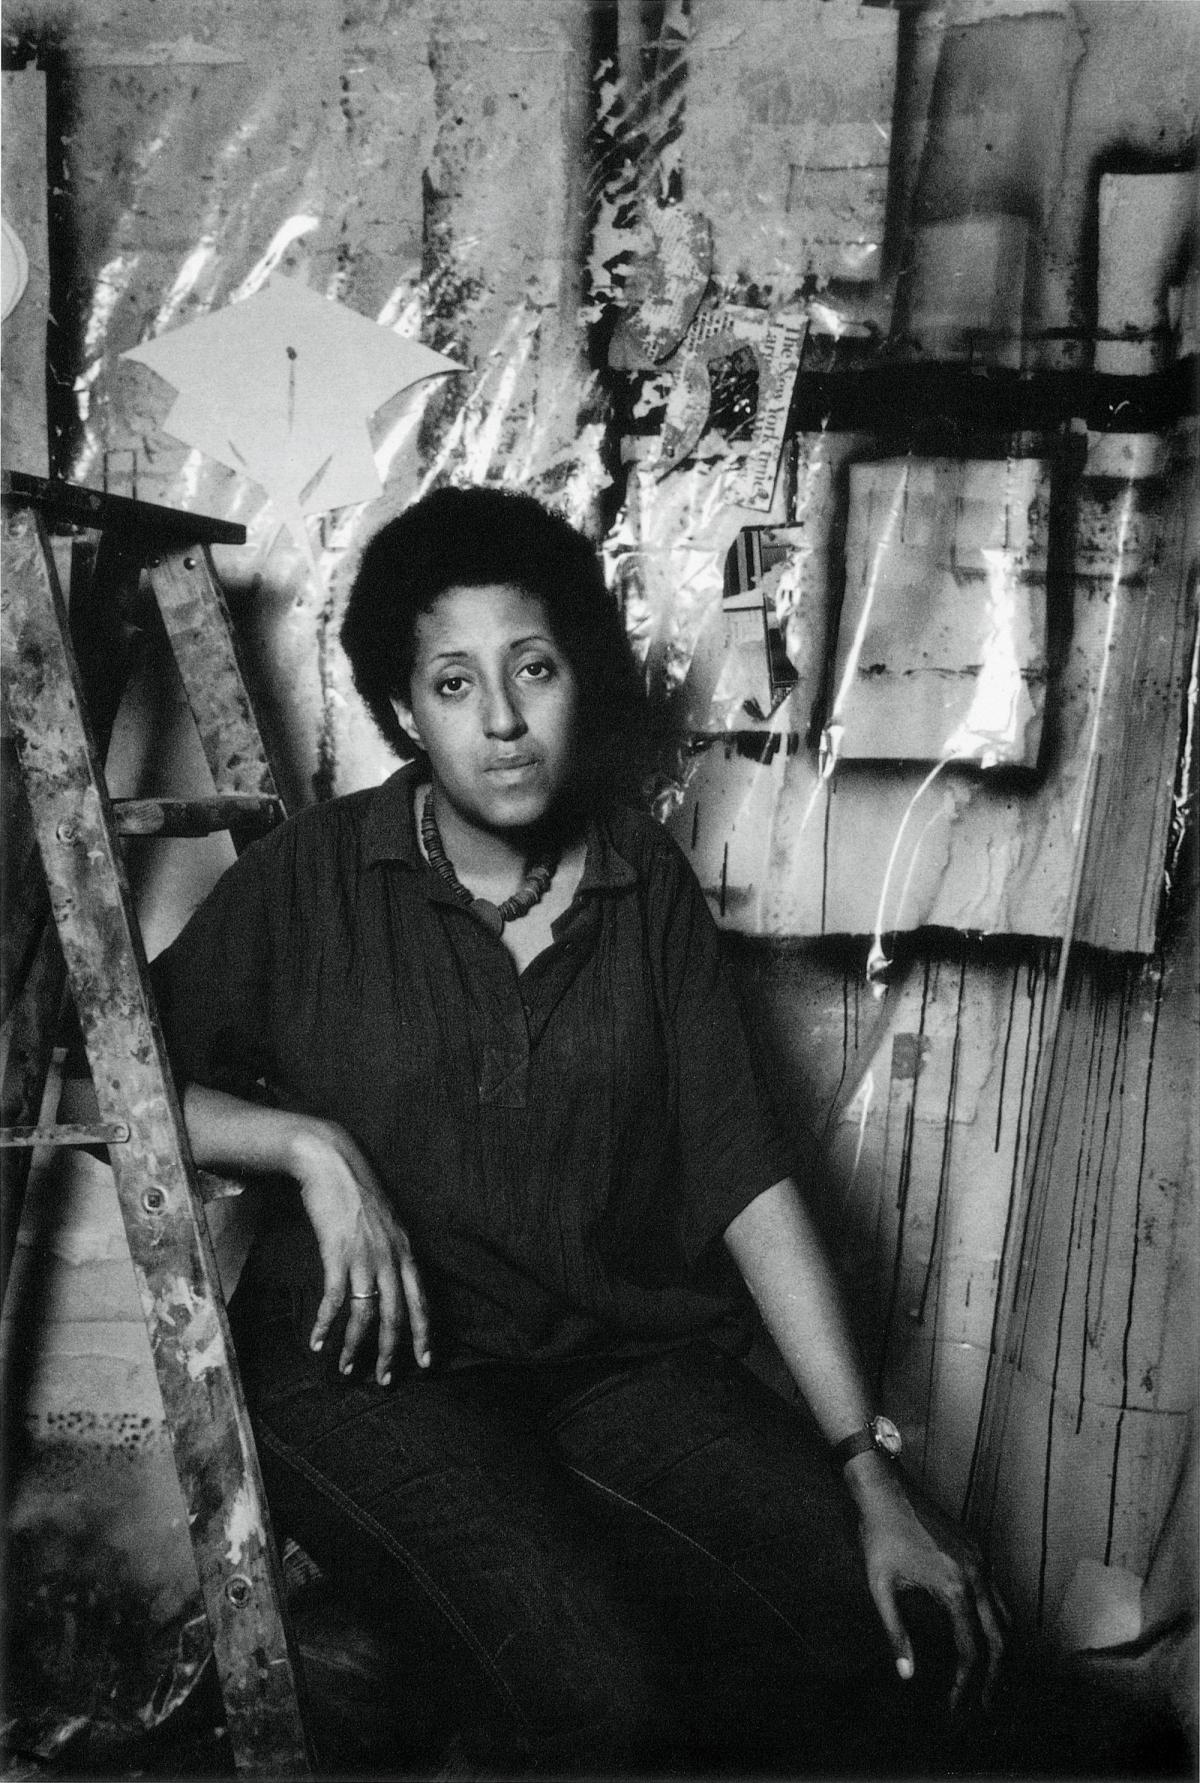 Howardena Pindell dans son atelier sur Seventh Avenue and 28th Street, New York, vers 1973. © Courtesy the artist, Garth Greenan Gallery, and Victoria Miro.